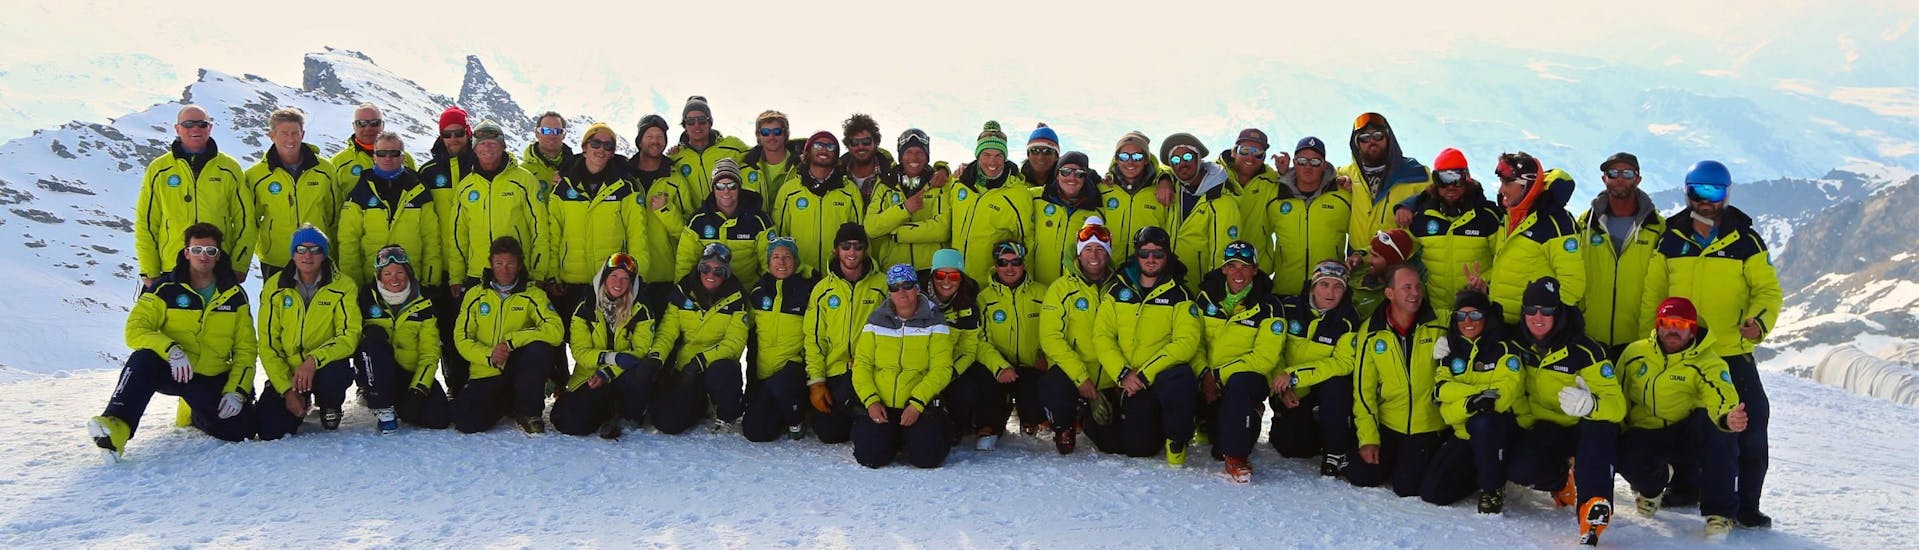 Picture of the instructors of the ski school Prosneige Tignes.